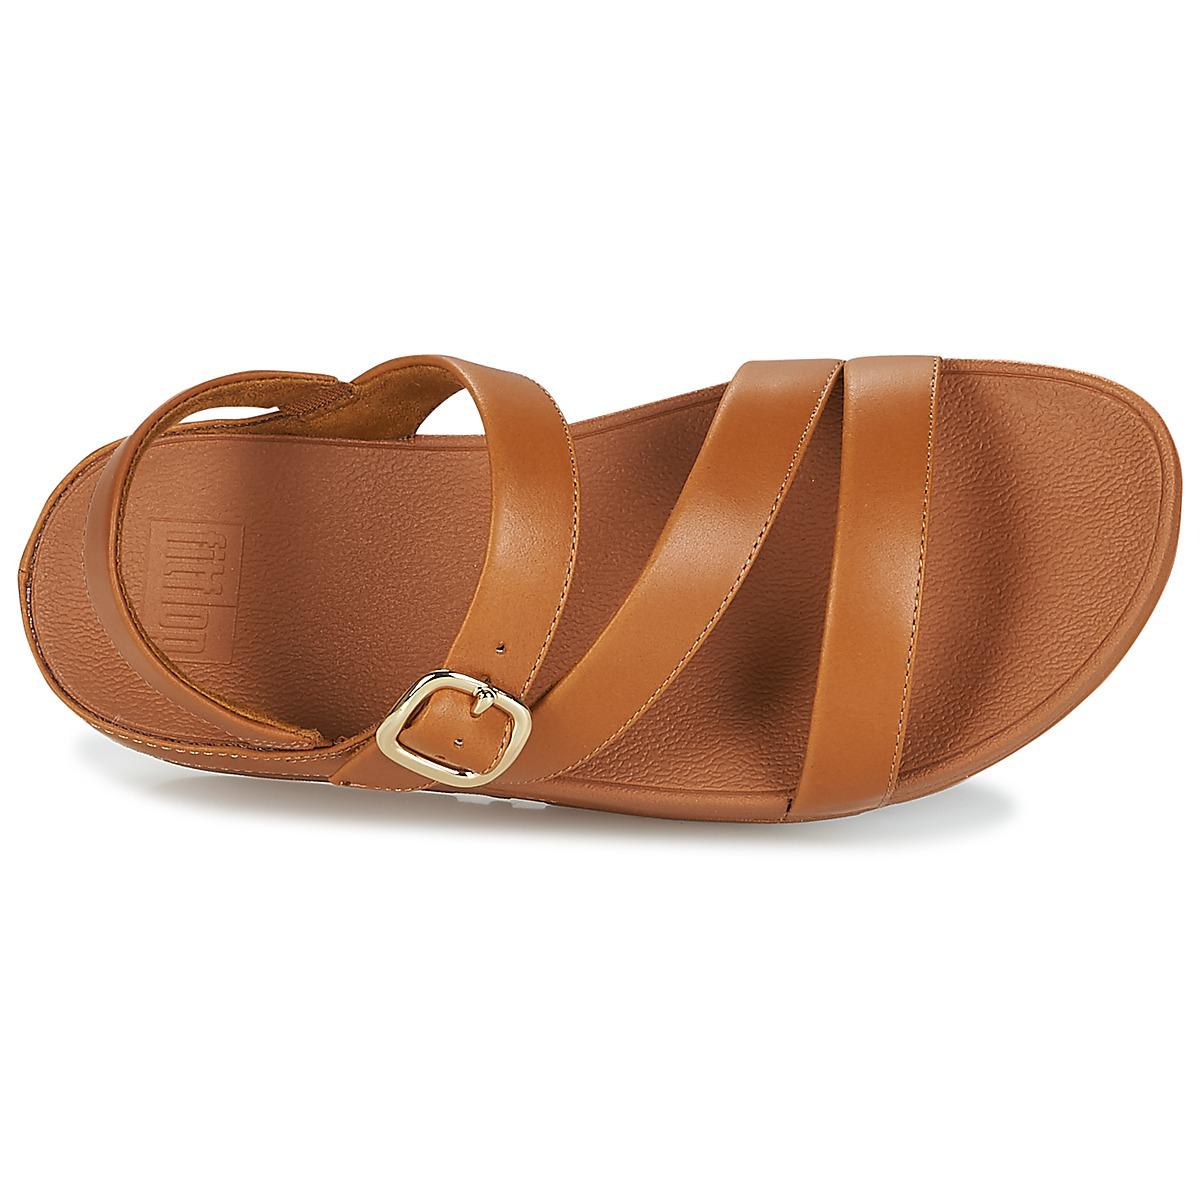 Fitflop The Skinny Ii Back Strap Sandals Sandals in Brown - Lyst